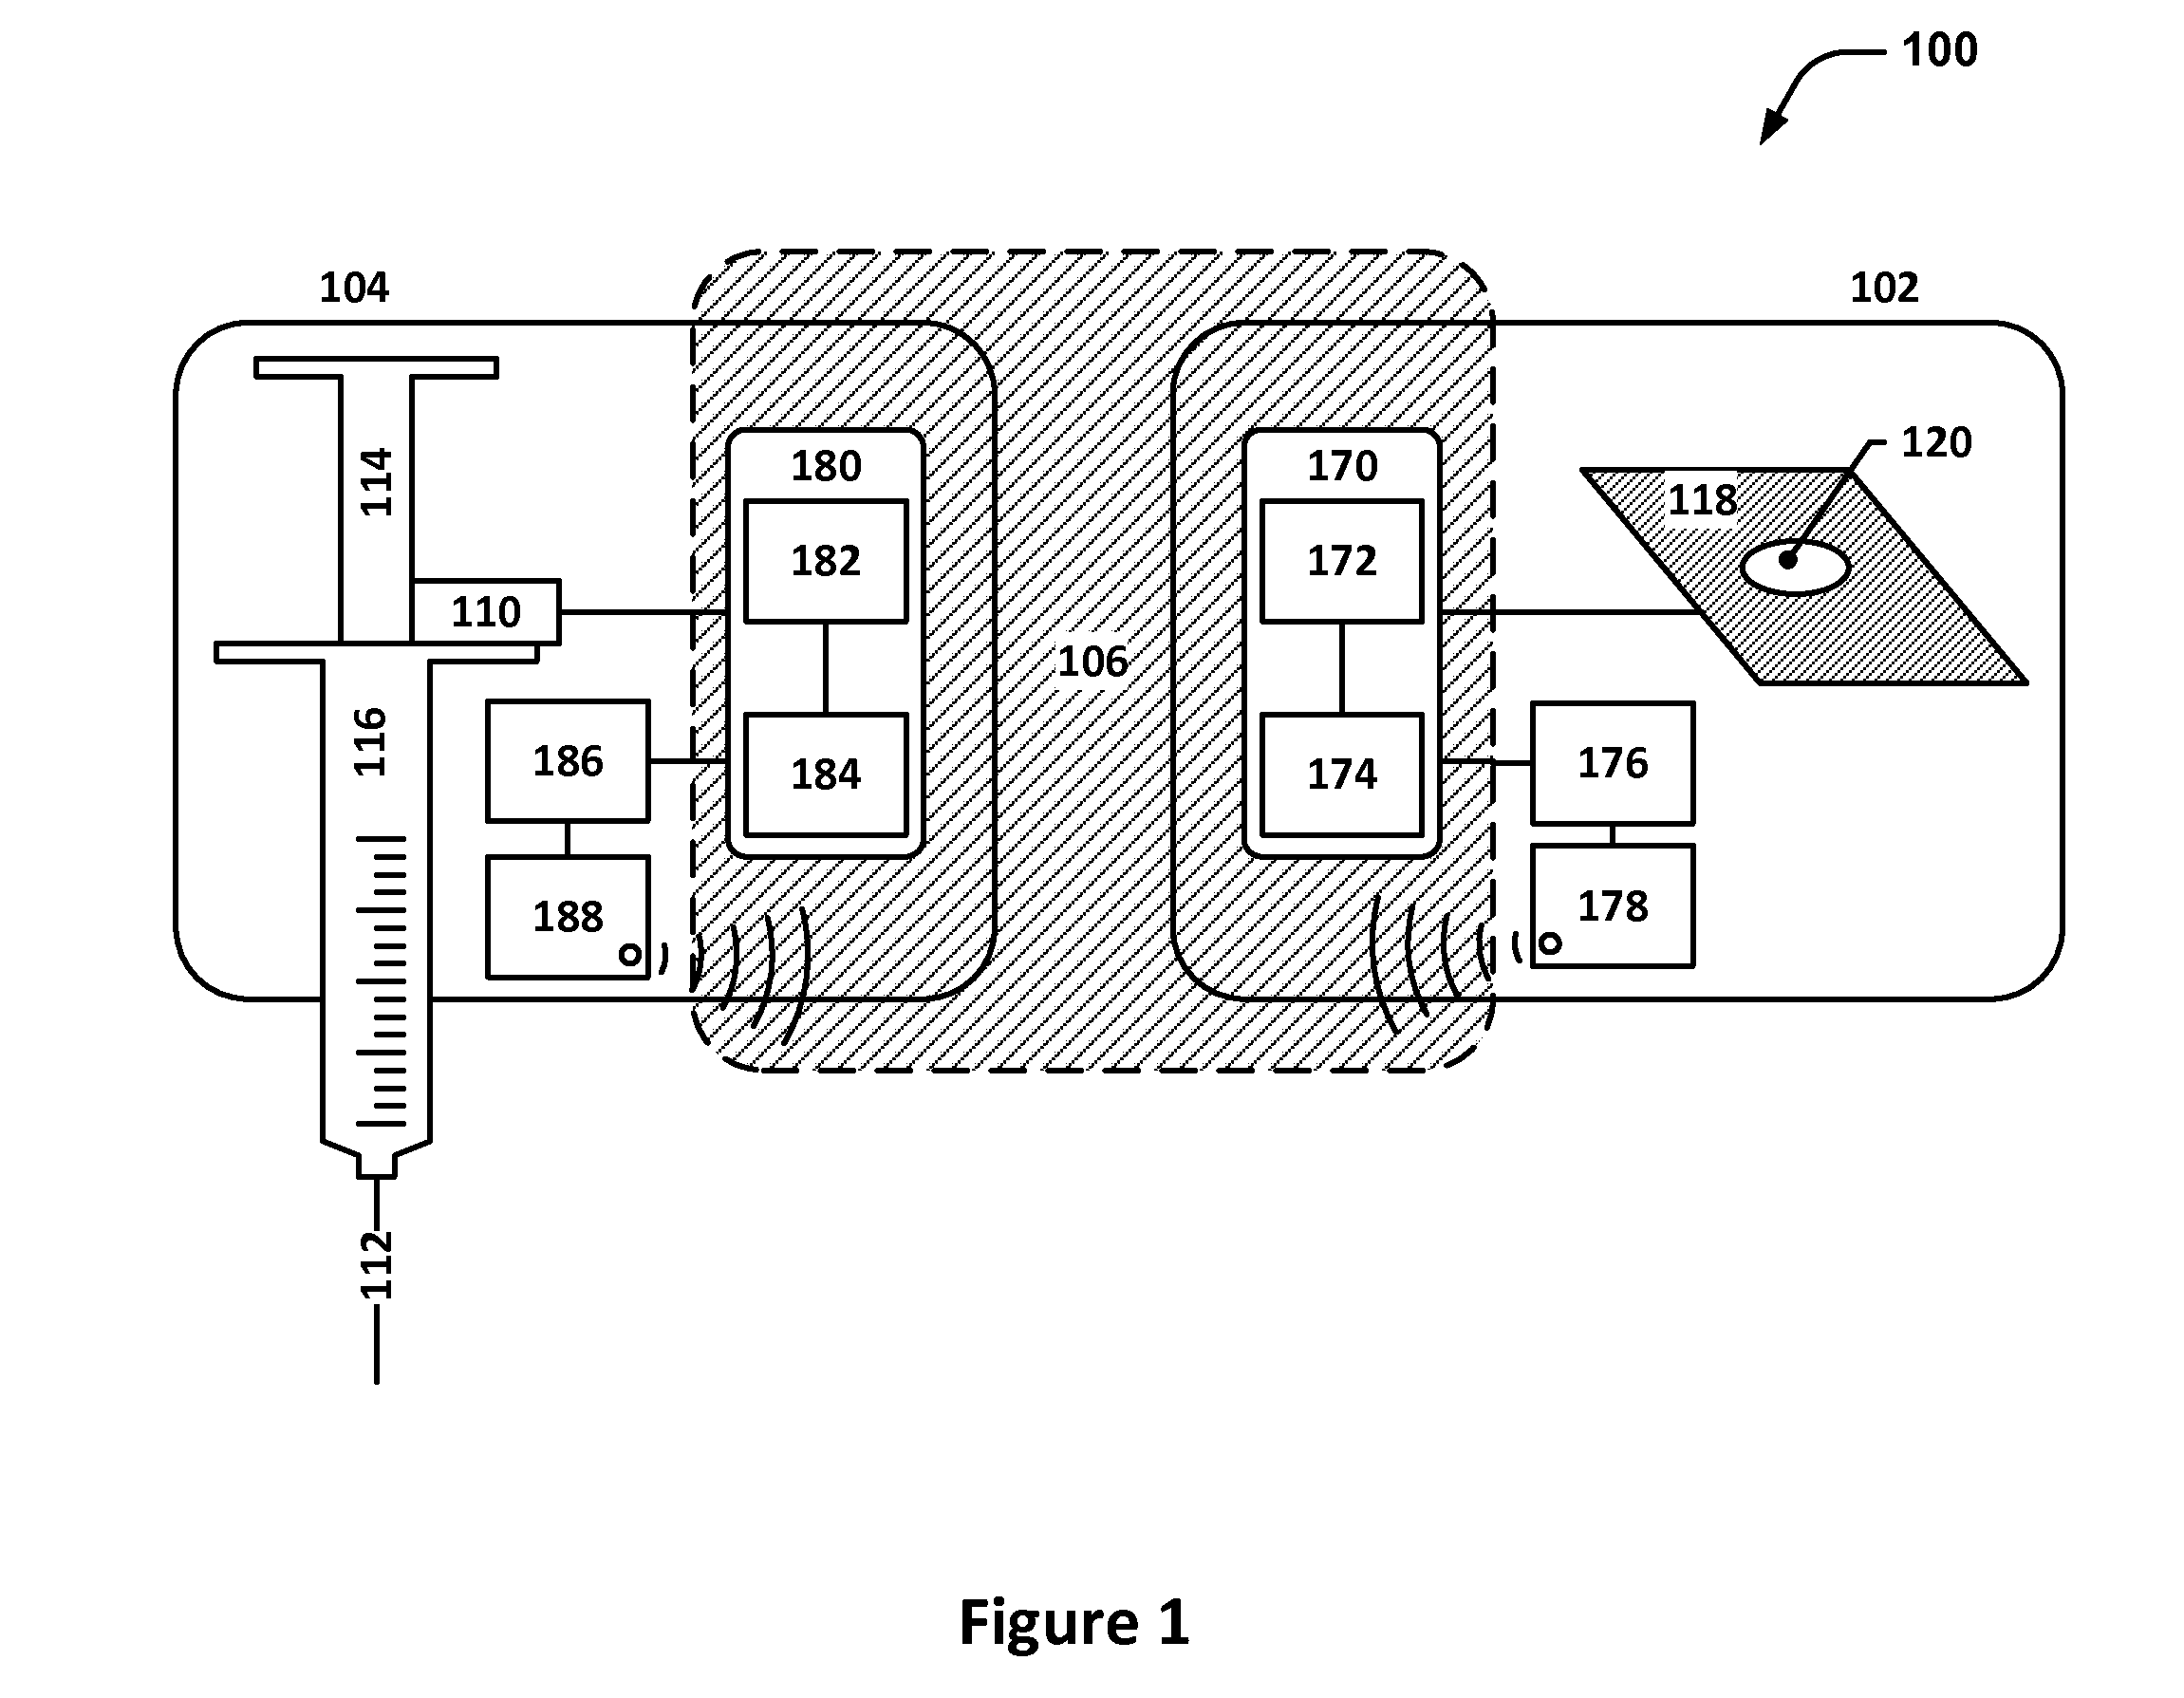 Subcutaneous injection system with adhesive injection site indicator